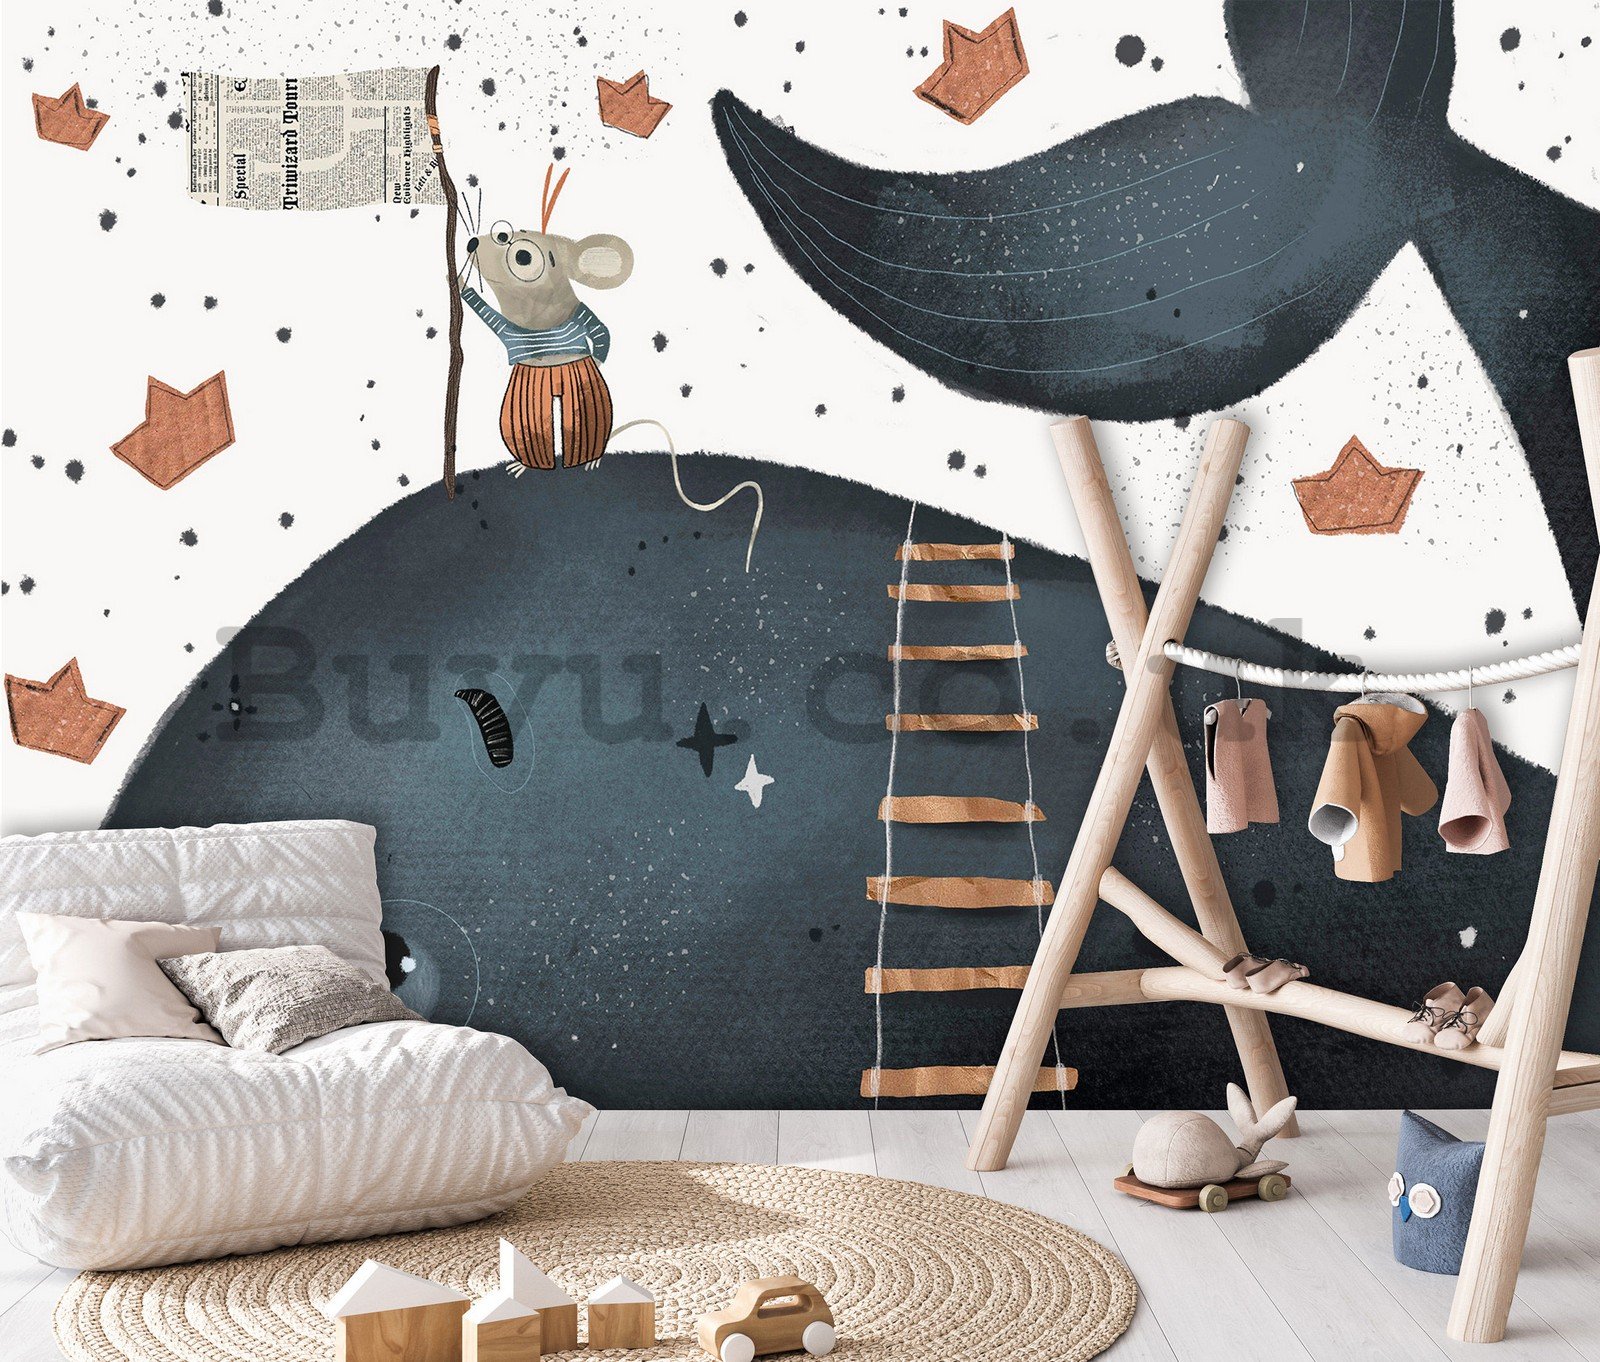 Wall mural vlies: Children's wallpaper whale and mouse - 152,5x104 cm